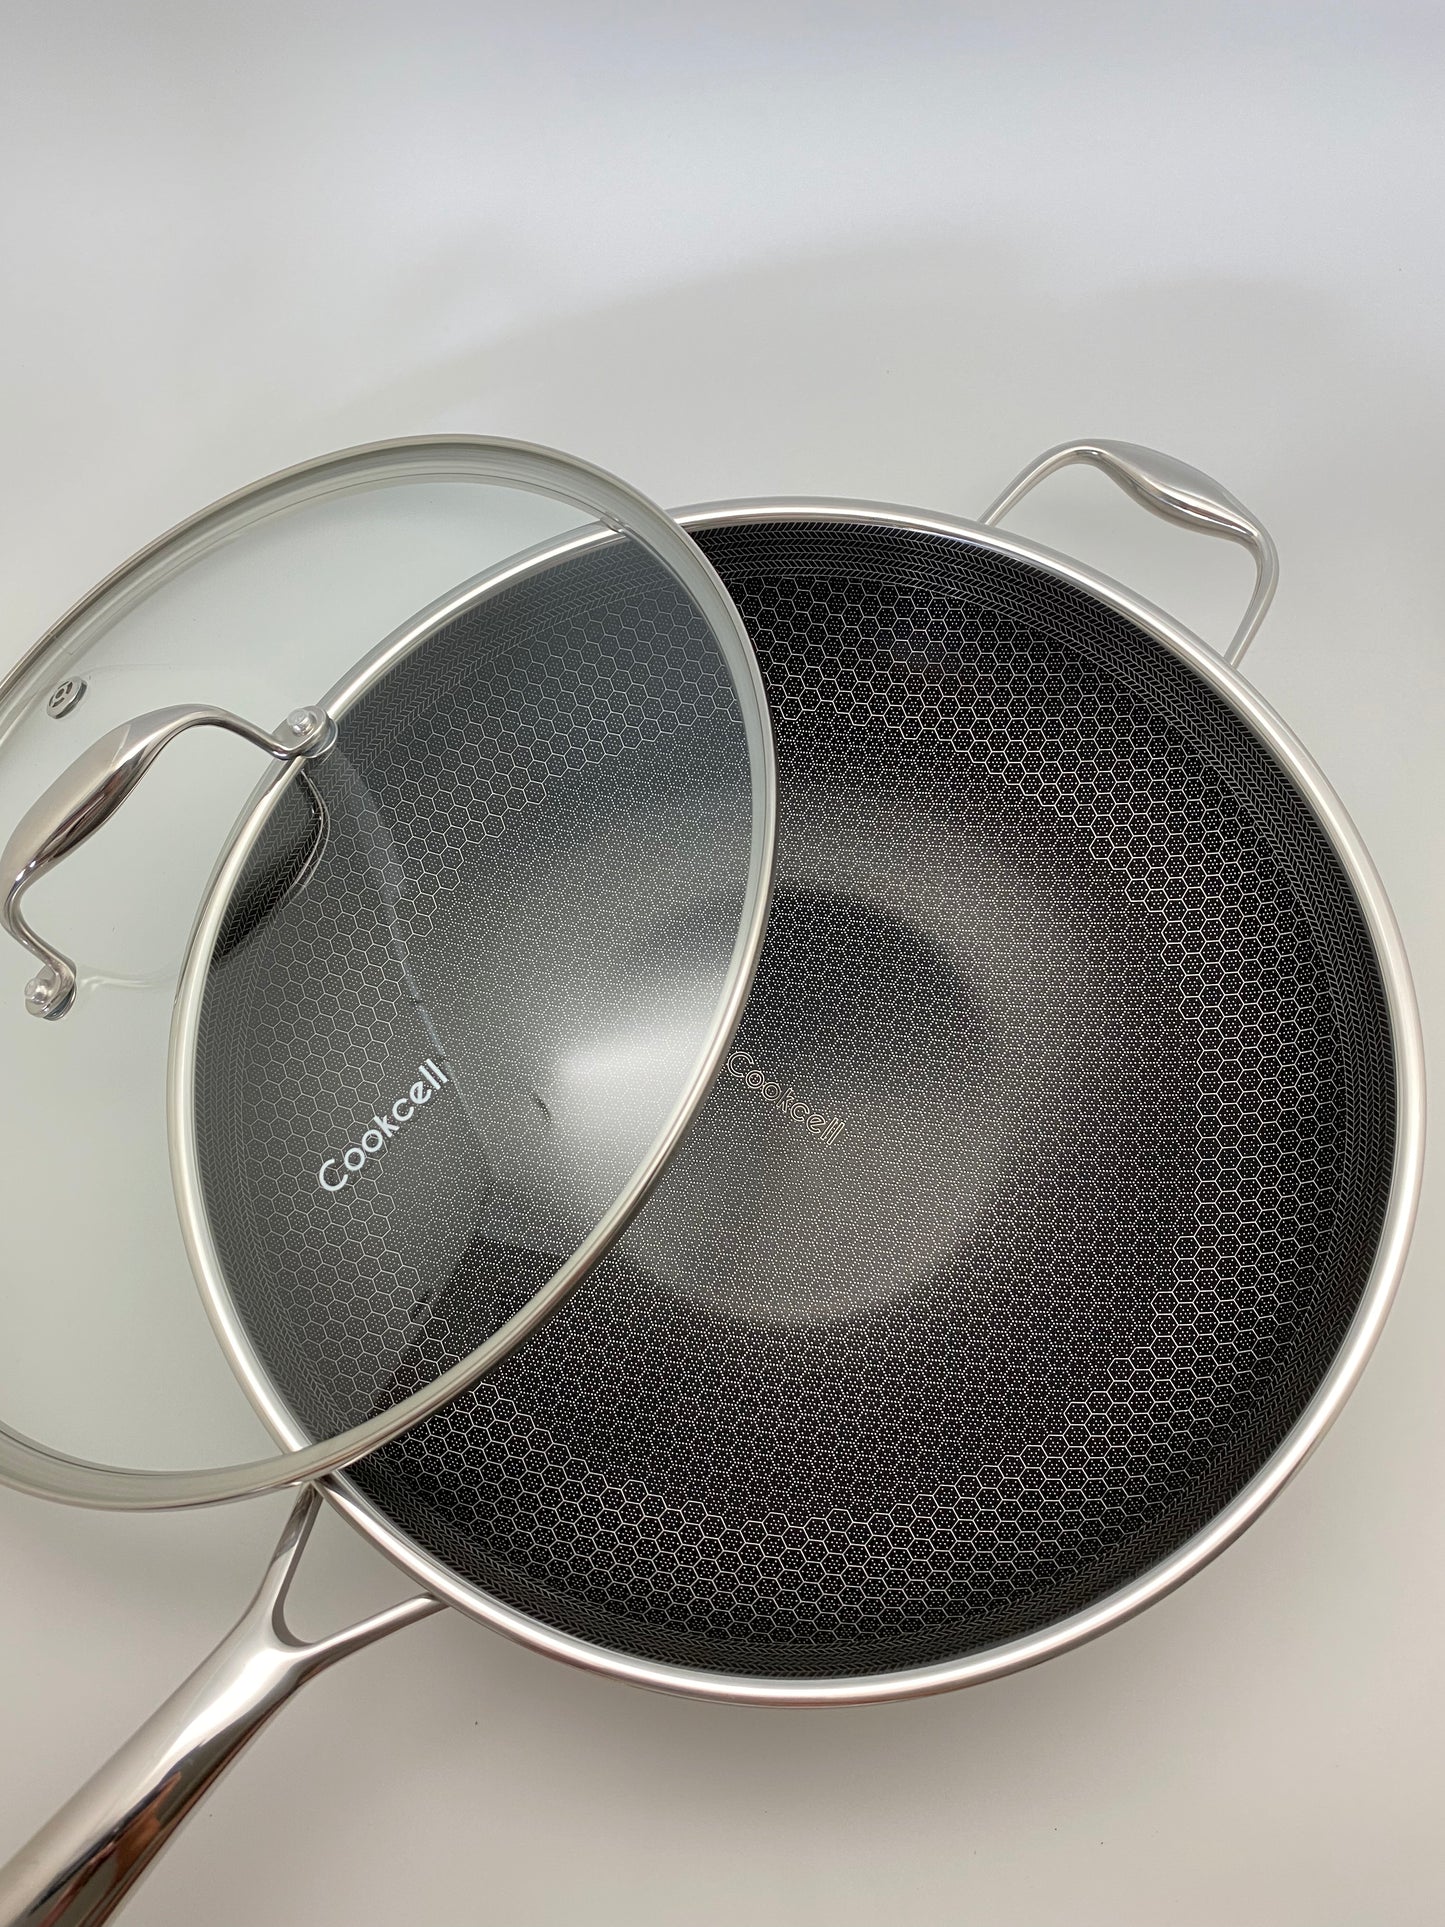 Cook Cell Lid